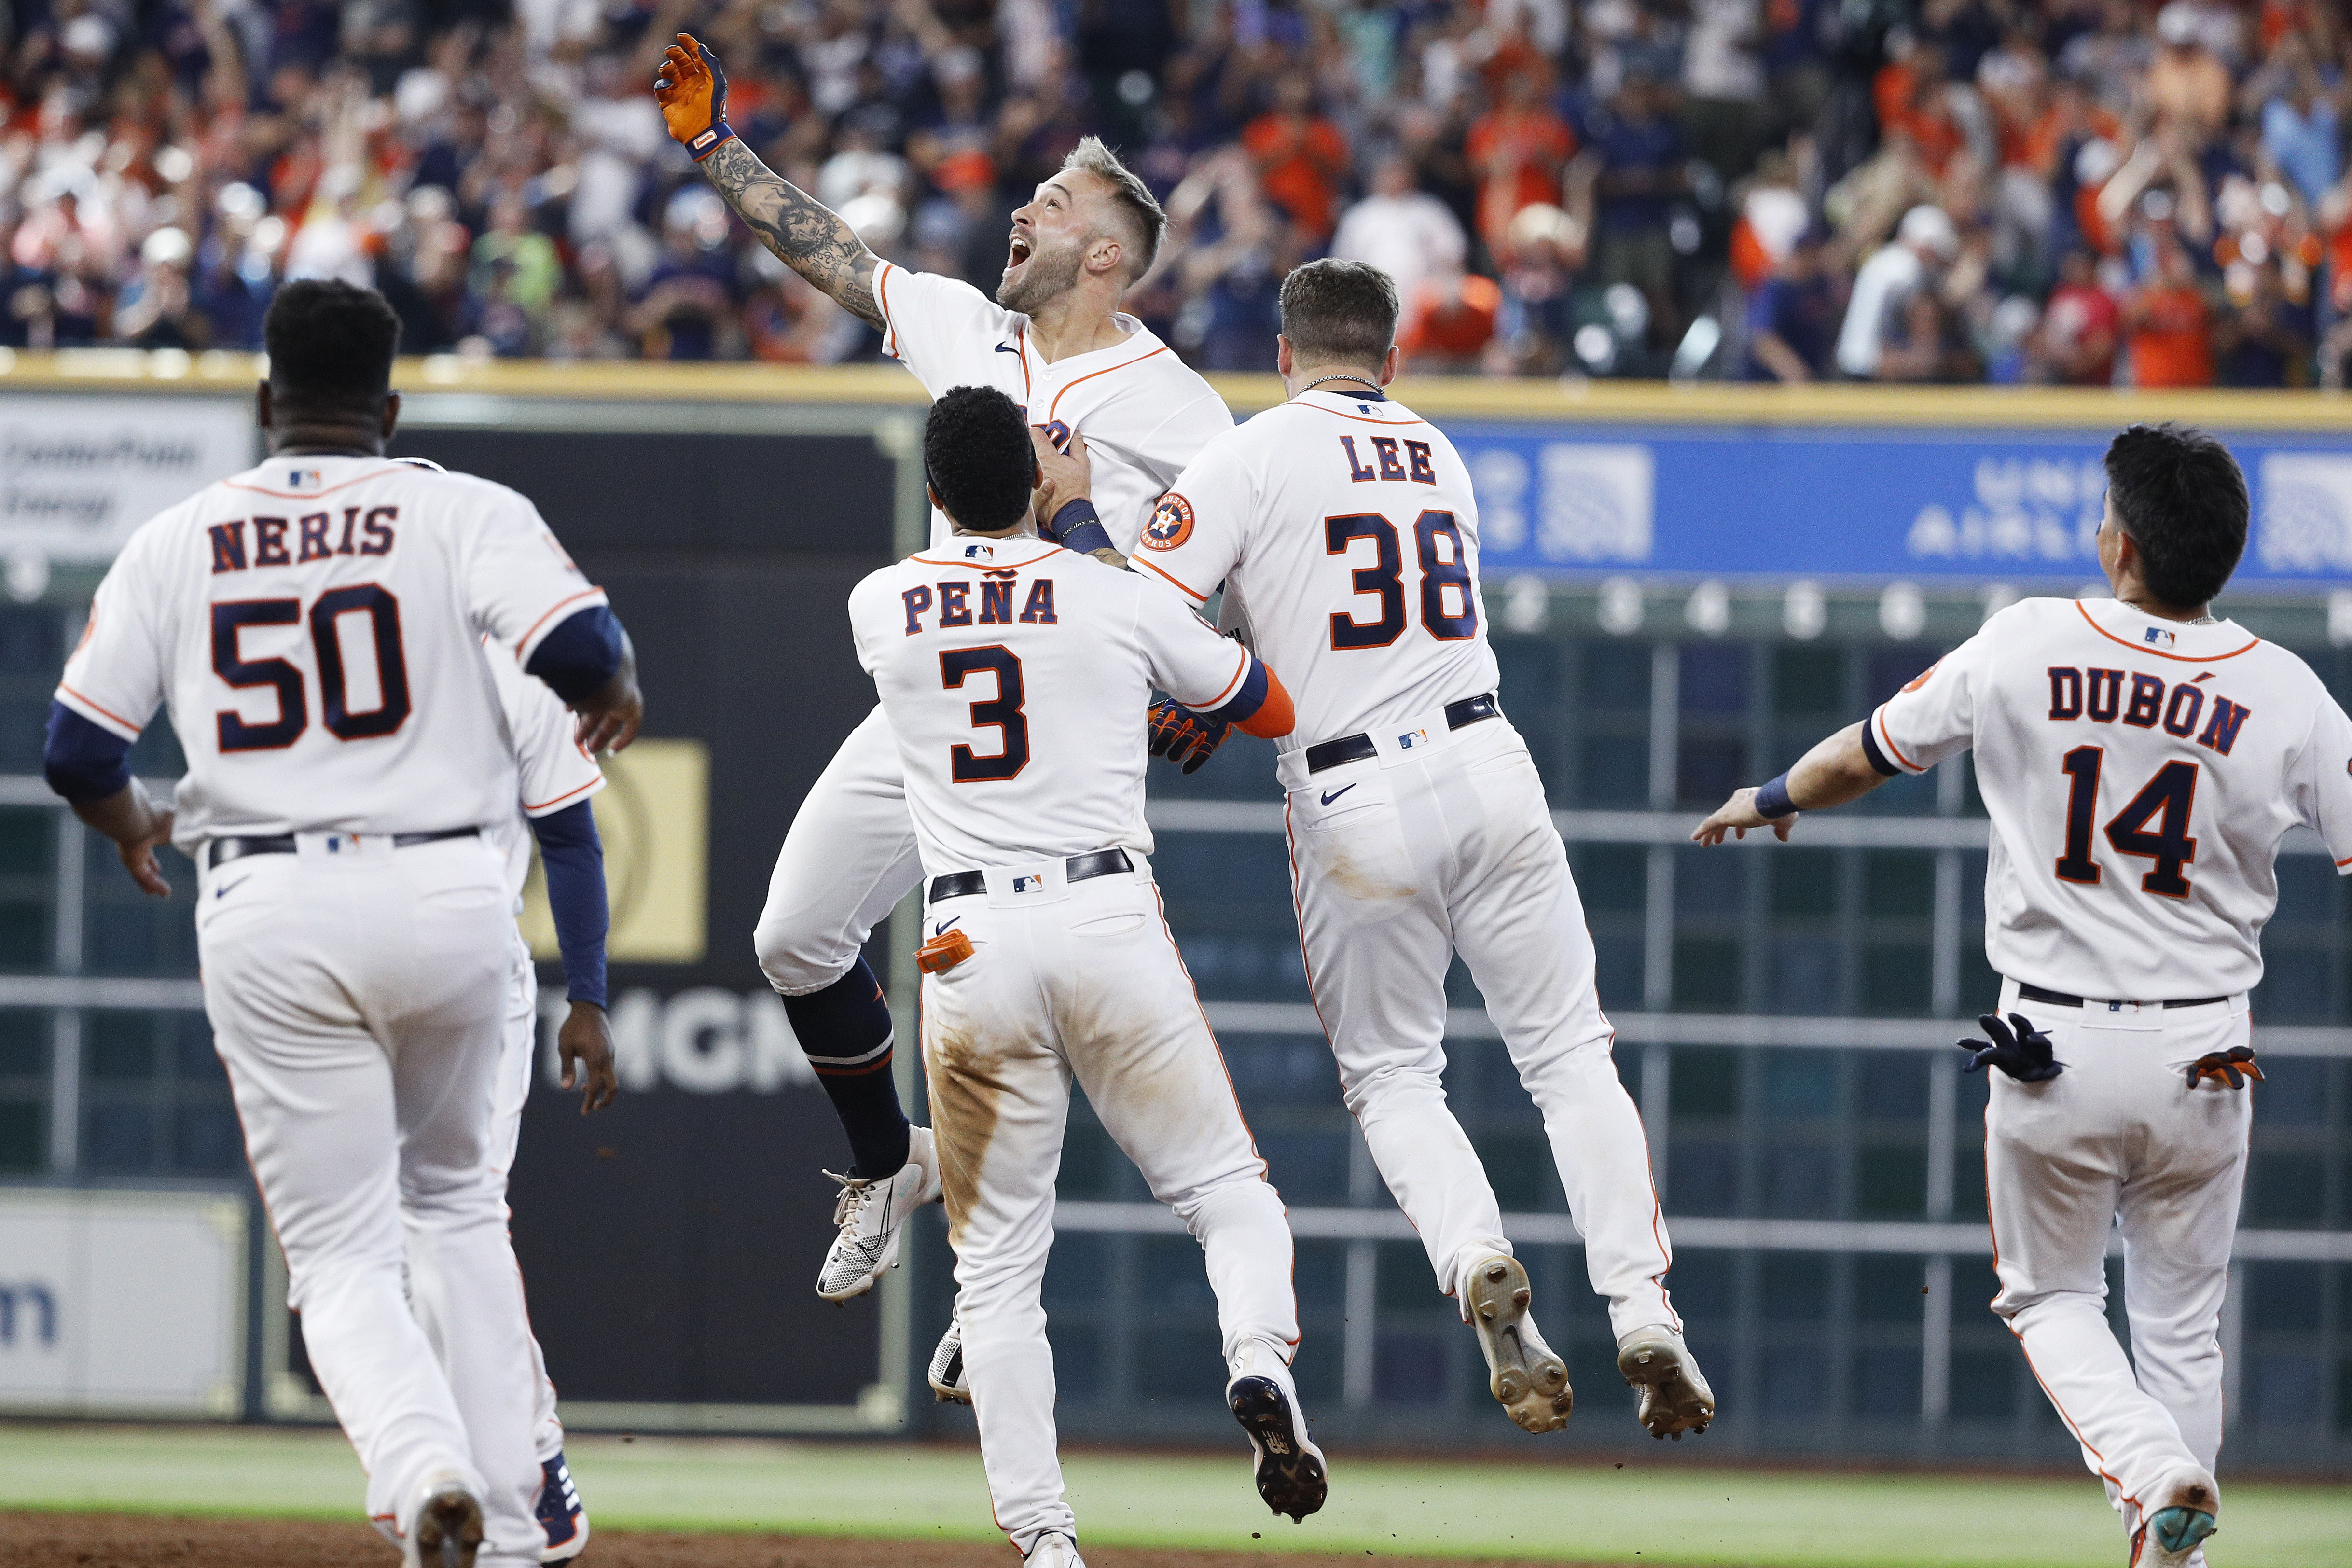 Astros vs. Yankees live updates: Bregman HR lifts Astros to win, 3-2